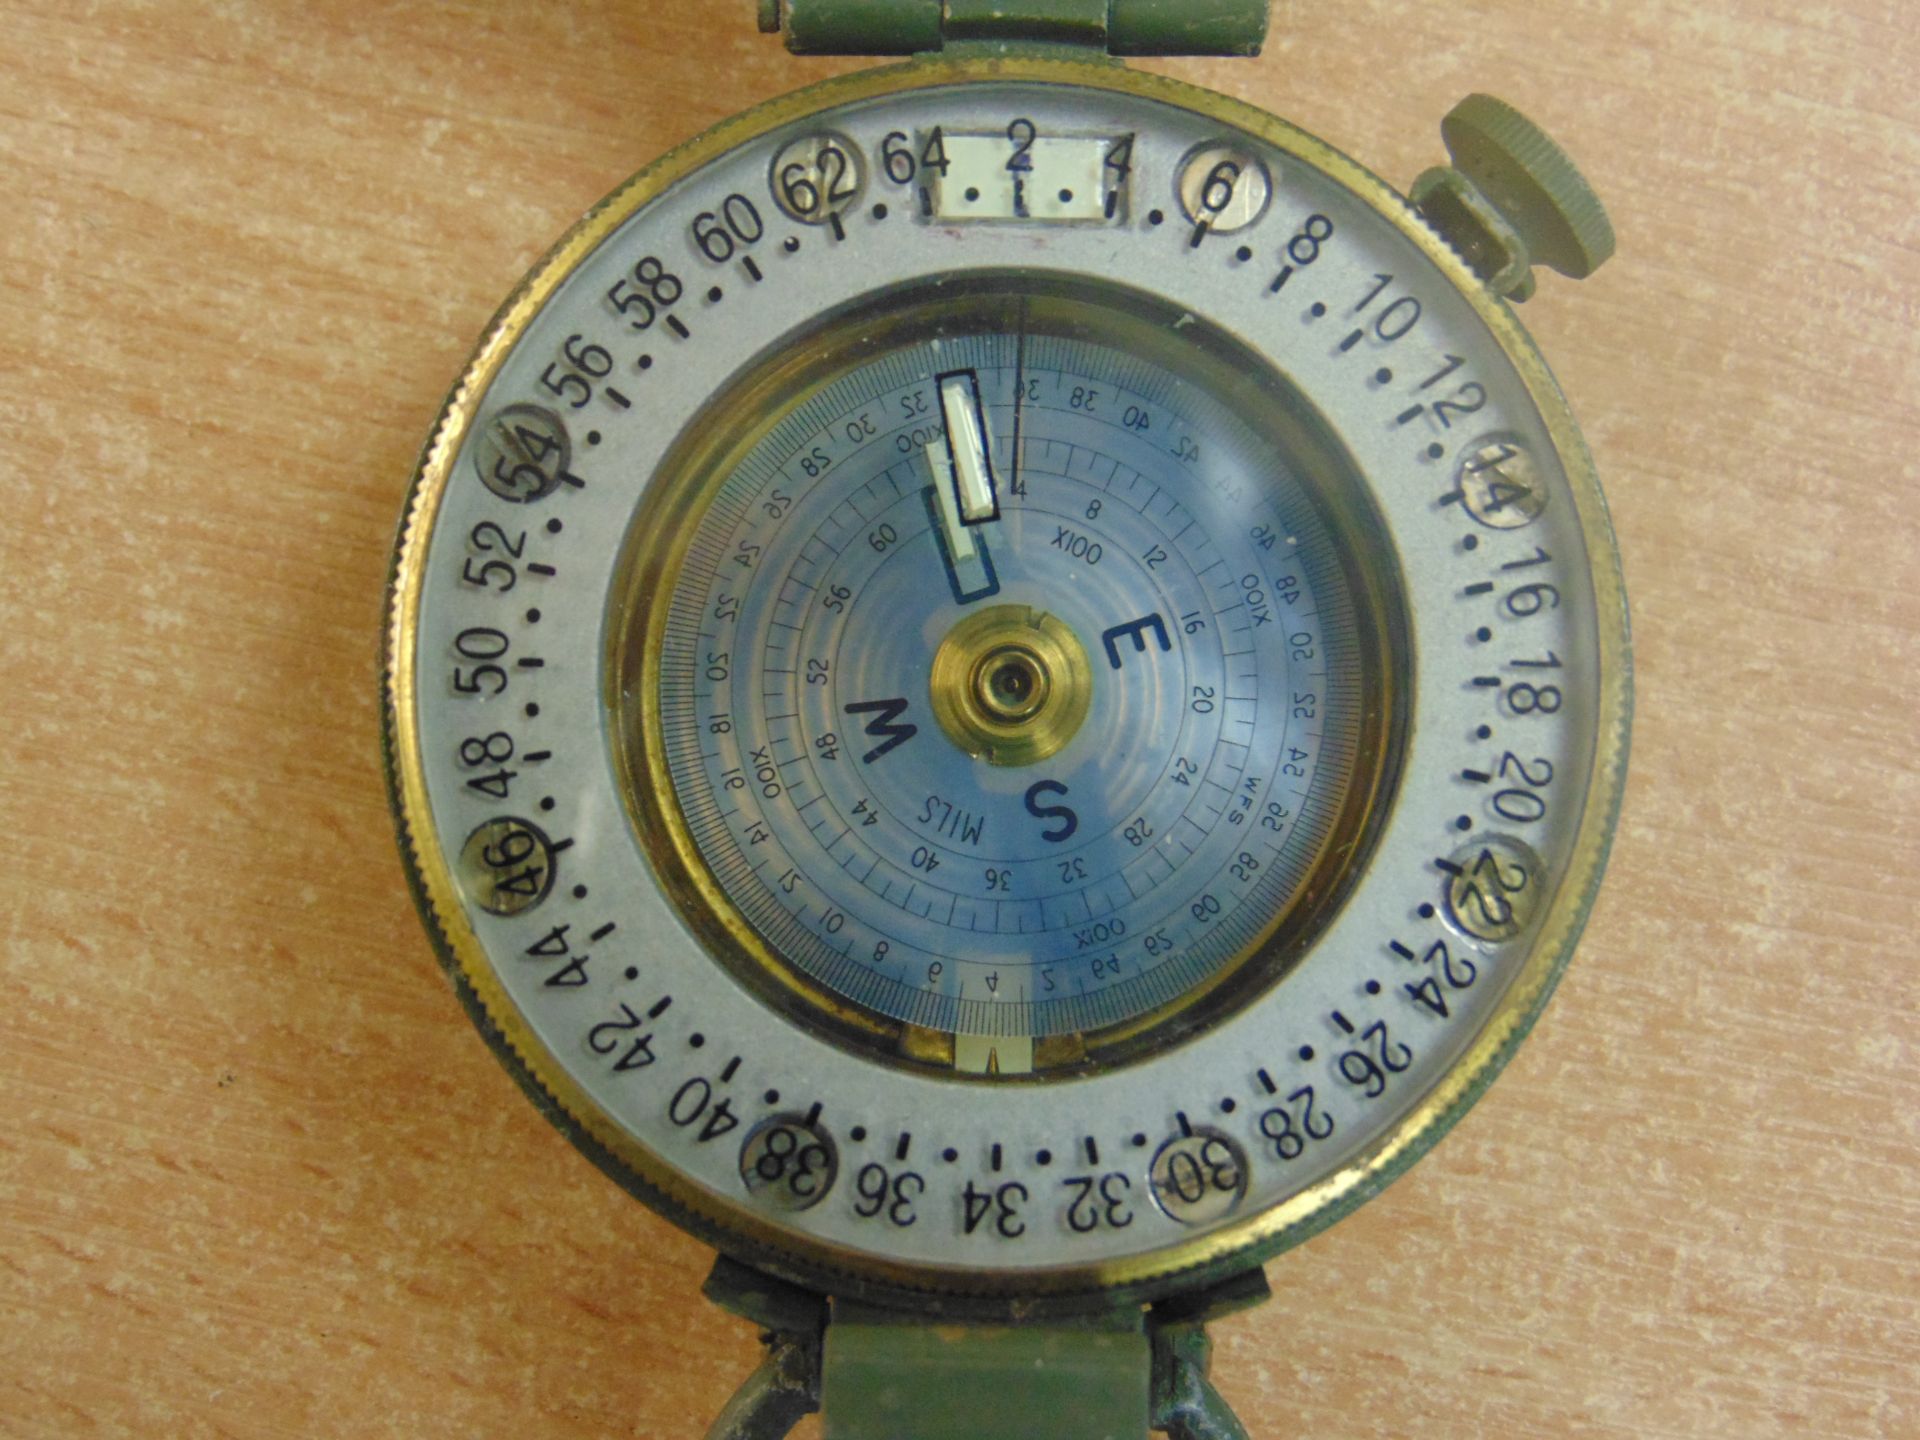 STANLEY LONDON BRASS PRISMATIC COMPASS BRITISH ARMY ISSUE NATO MARKS - Image 2 of 7